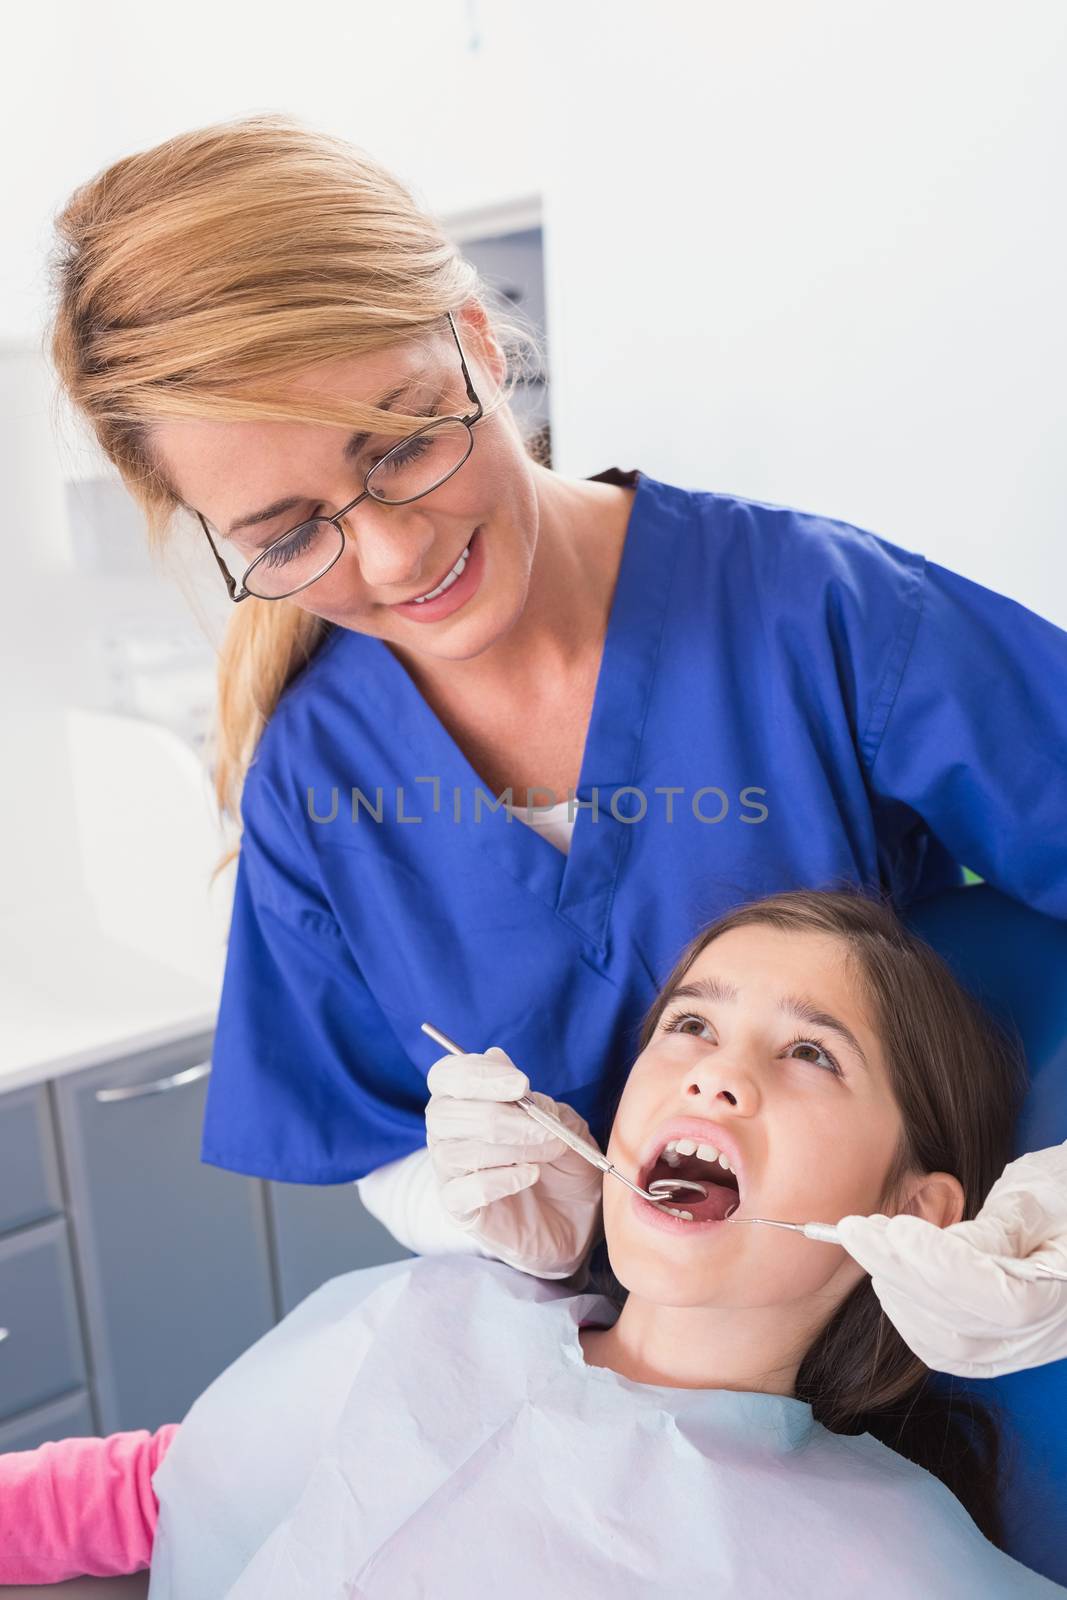 Pediatric dentist doing examination at a scared young patient by Wavebreakmedia